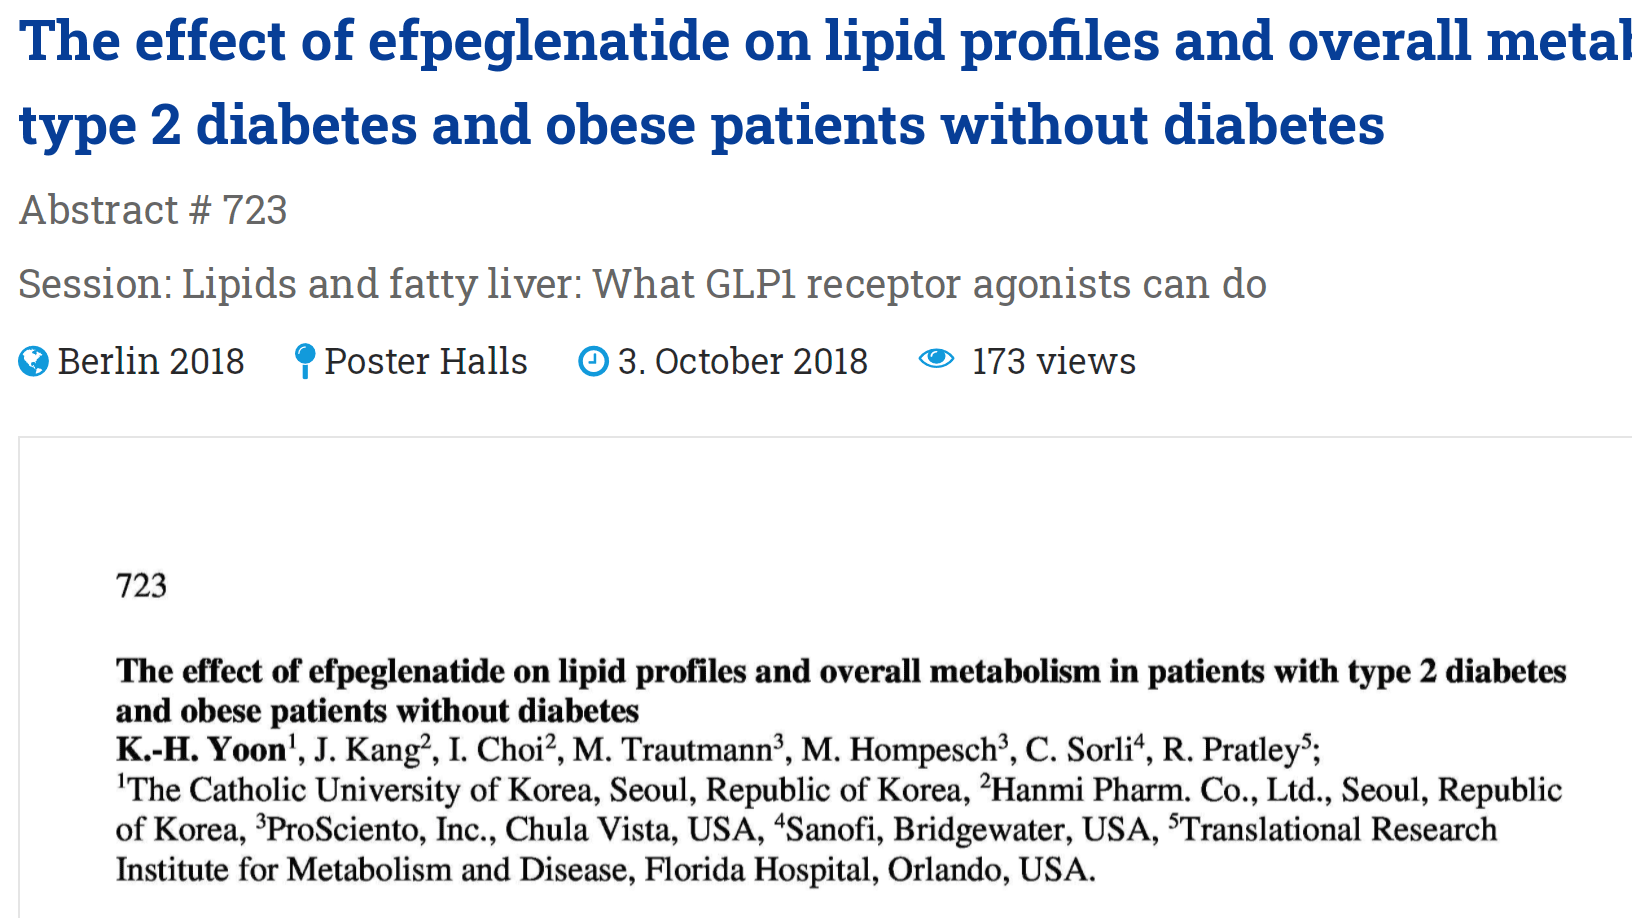 The effect of efpeglenatide on lipid profiles and overall metabolism in patients with type 2 diabetes and obese patients without diabetes thumbnail